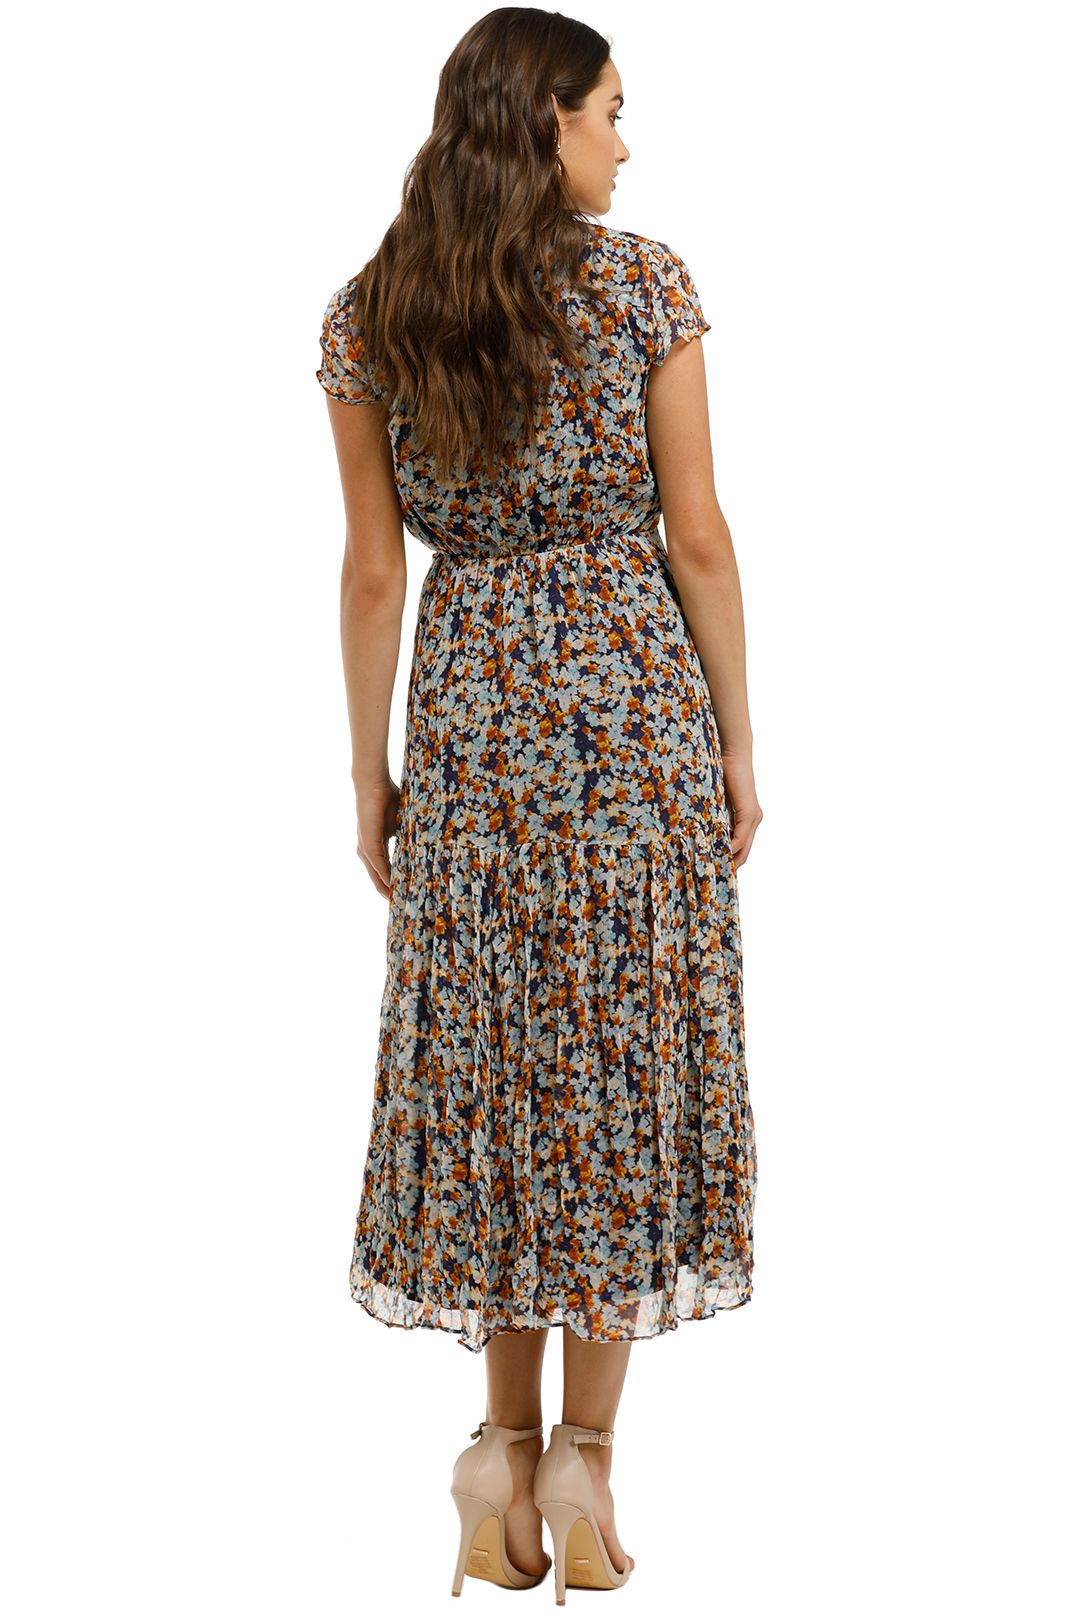 Stevie-May-Dixie-Midi-Dress-Dixie-Cup-Floral-Back